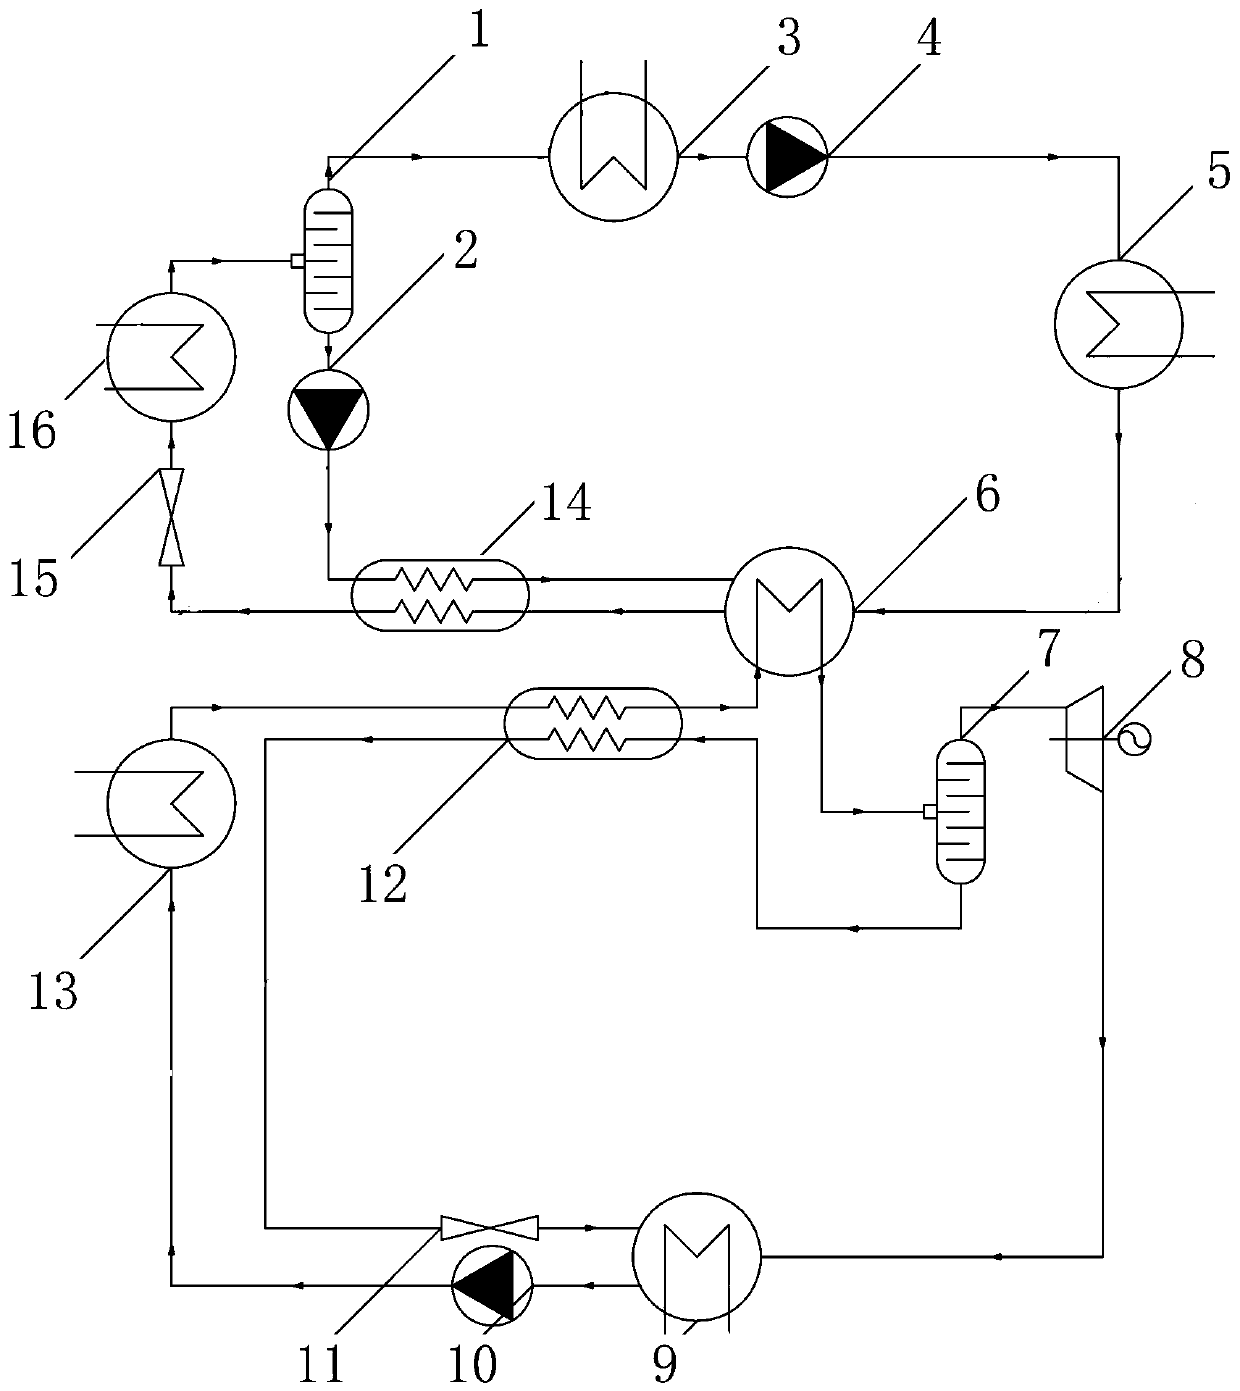 Absorption circulating system based on temperature and pressure raising technique